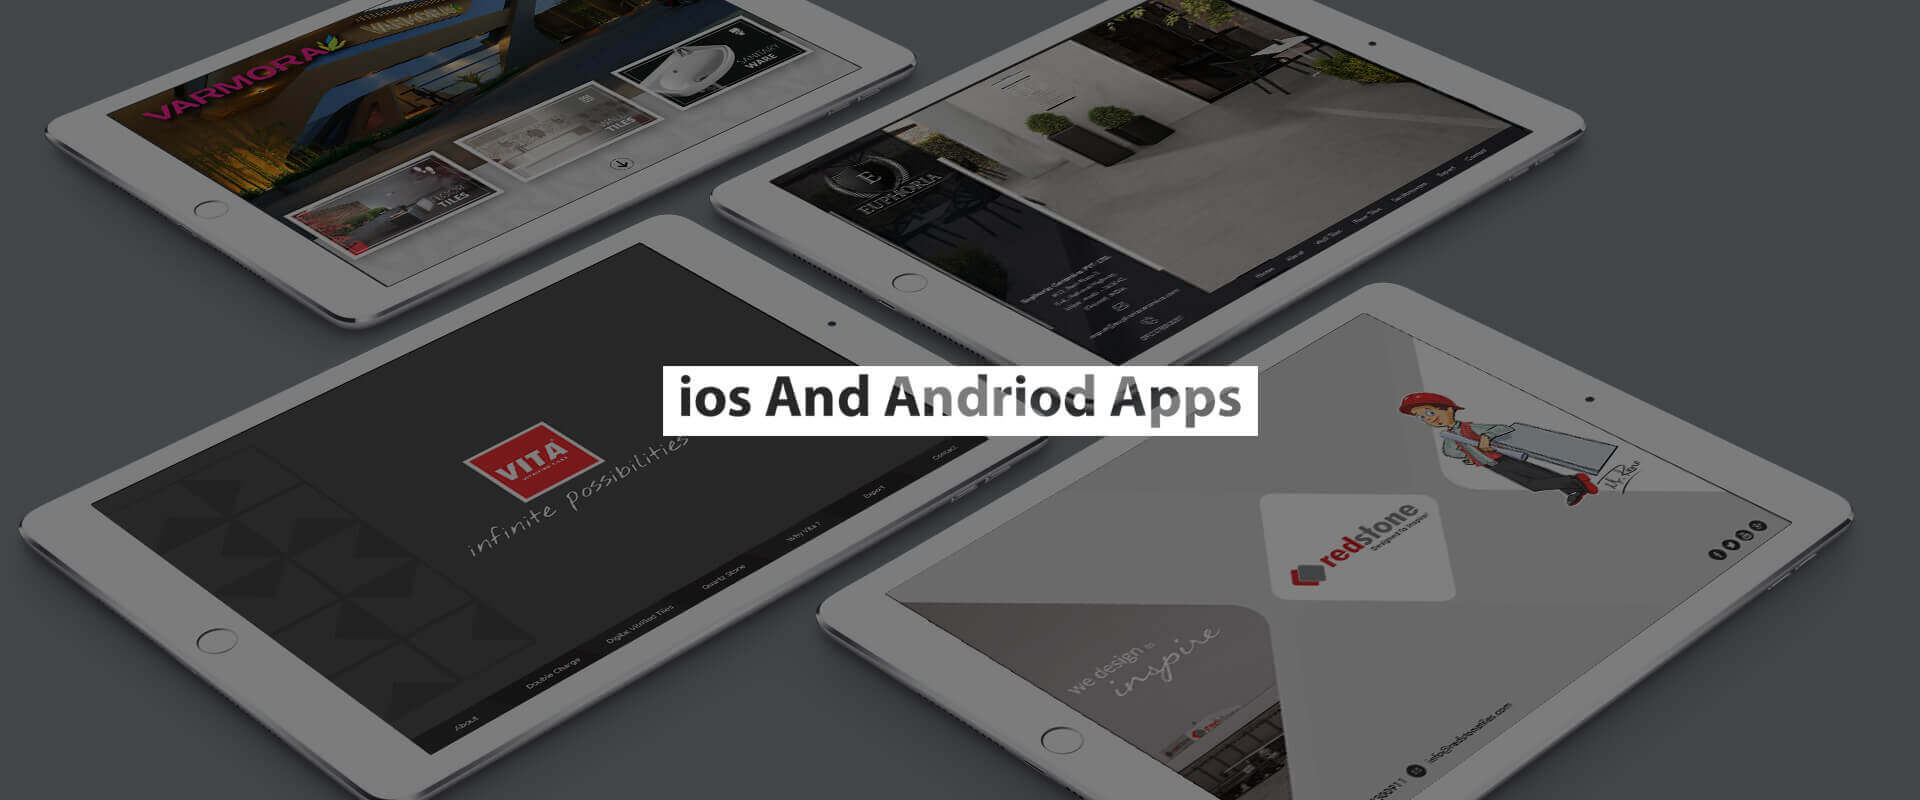 ios And Andriod Apps